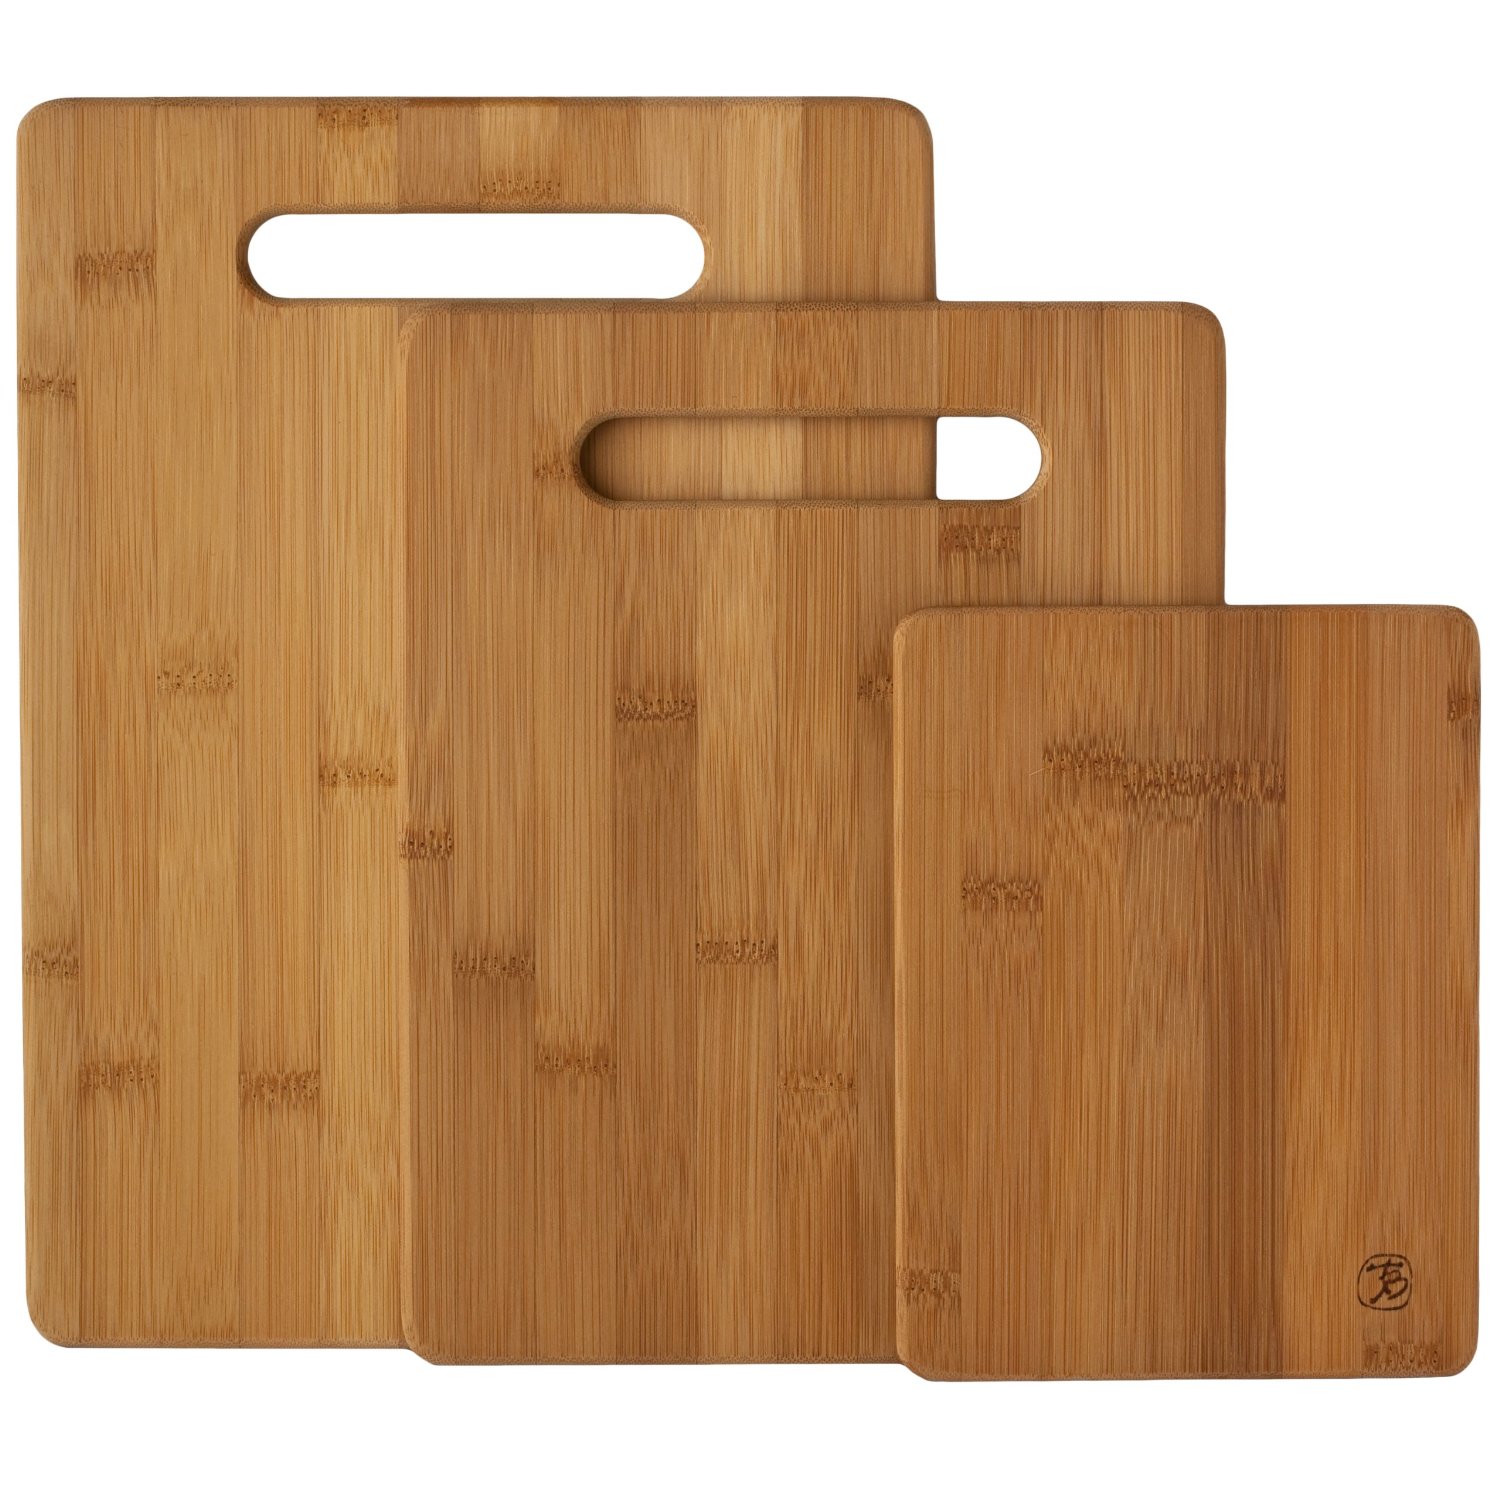 Totally Bamboo 20-7930 3-Piece Cutting Board Set , only $8.78